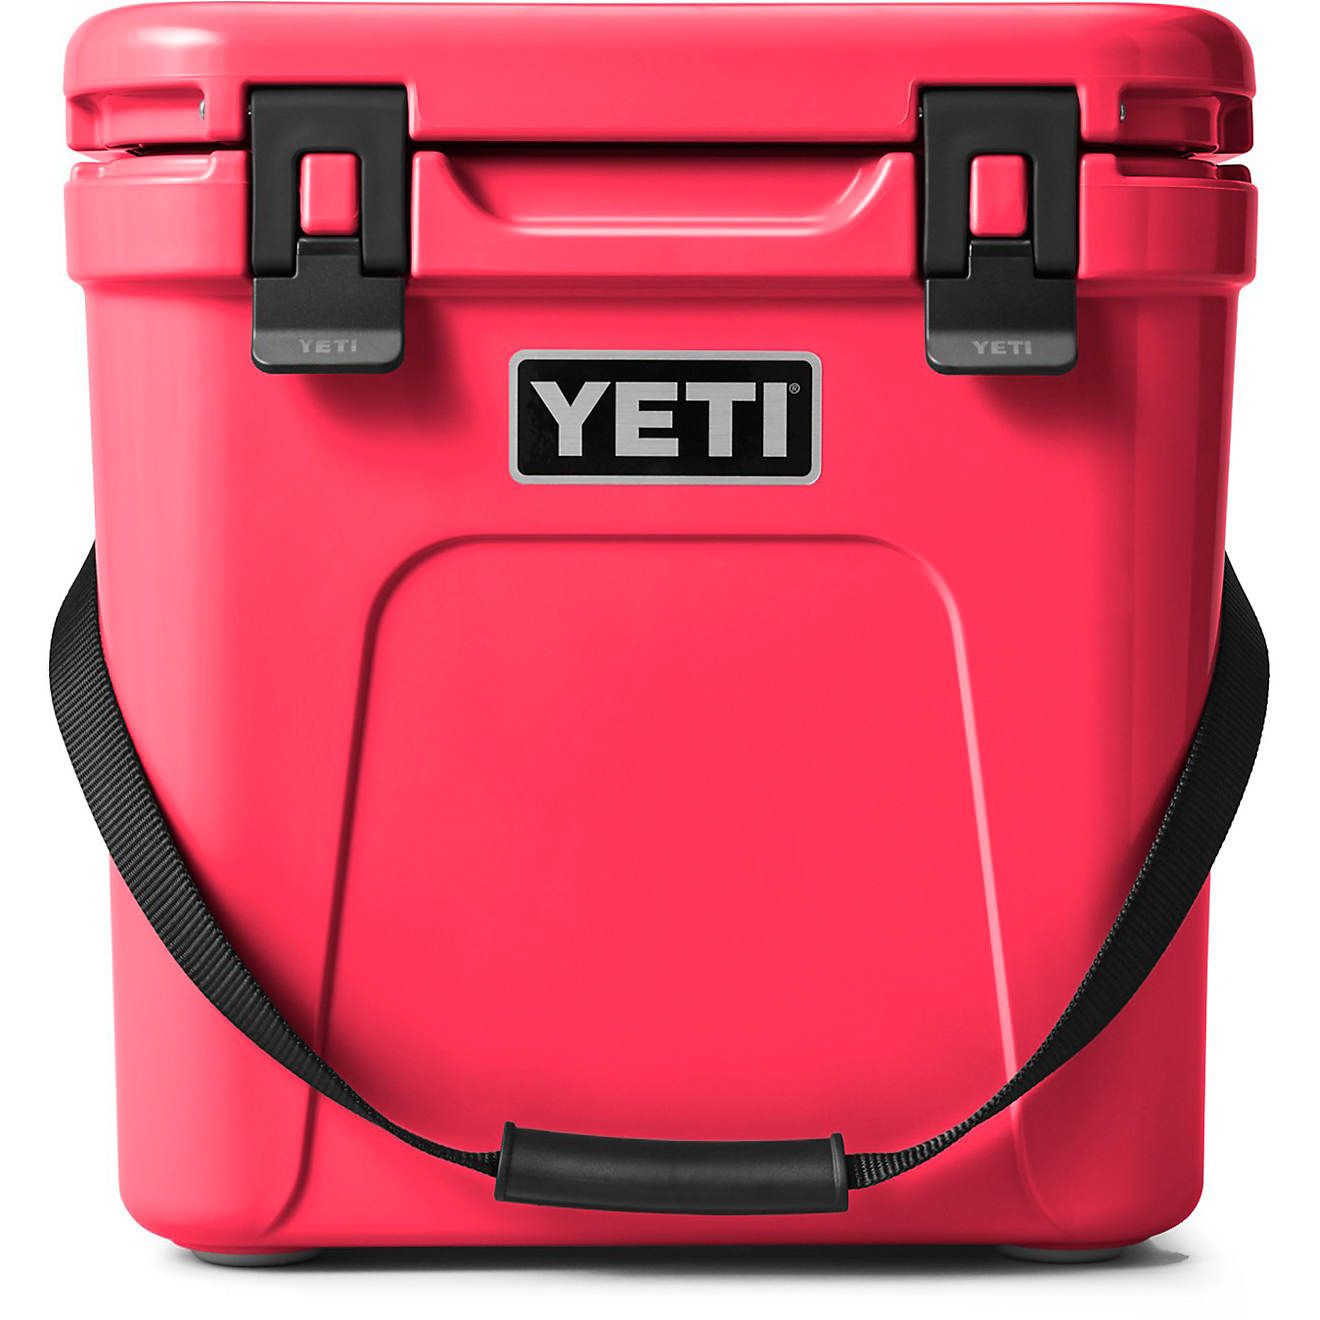 YETI Roadie 24 18-Can Hard Cooler | Academy | Academy Sports + Outdoors